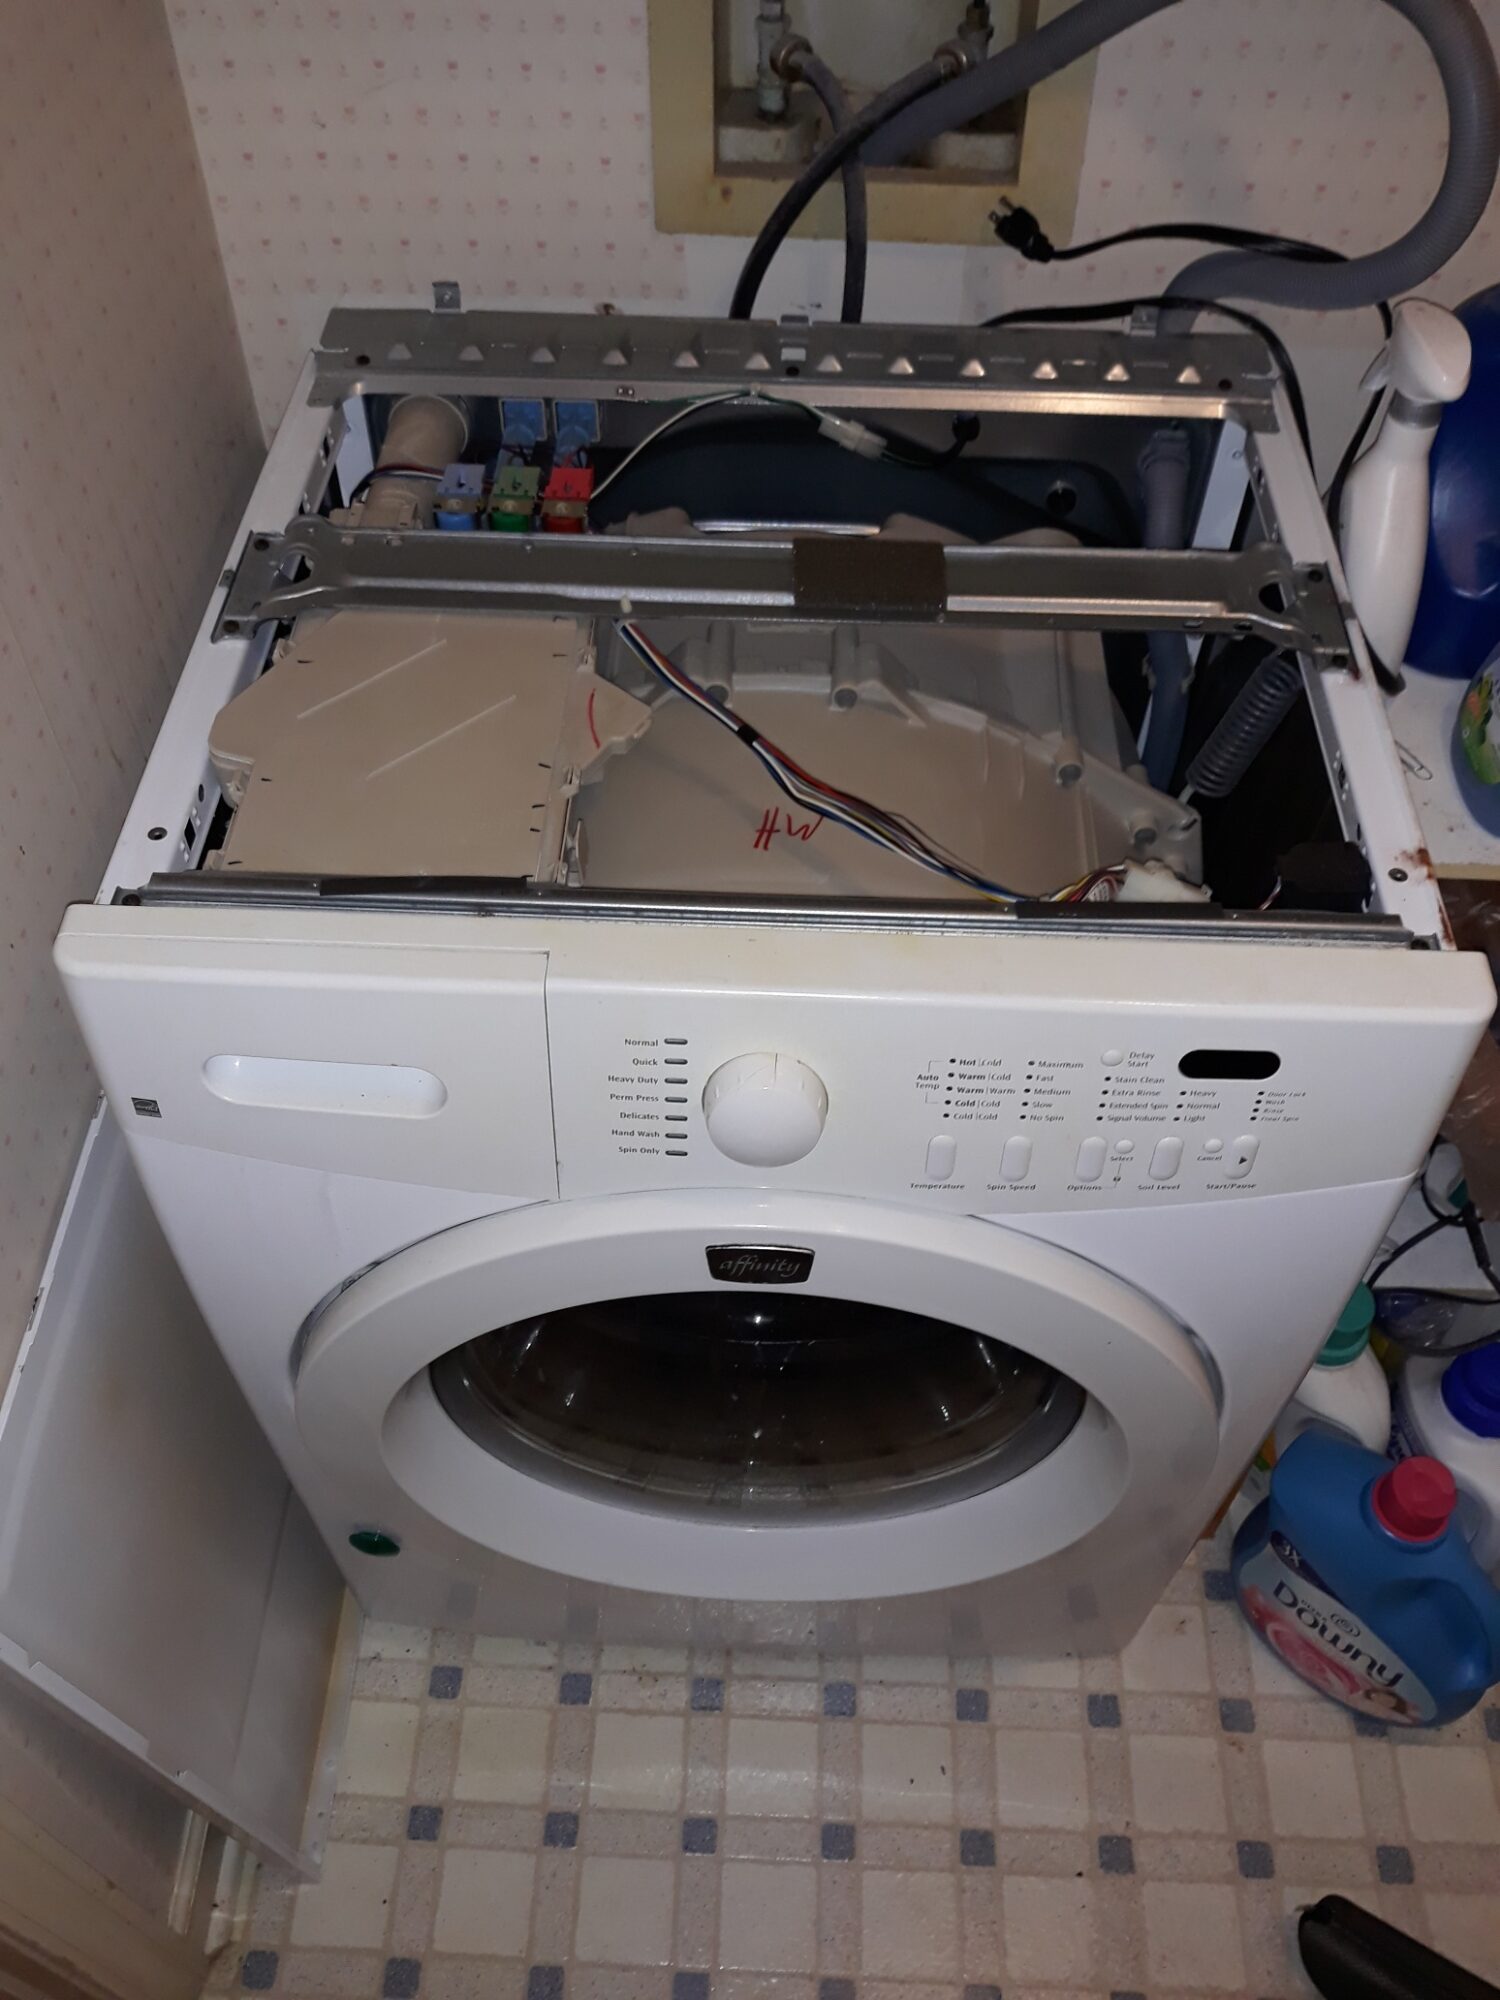 appliance repair washing machine repair require a replacement of the failed speed control board ashmore ave mascotte fl 34753